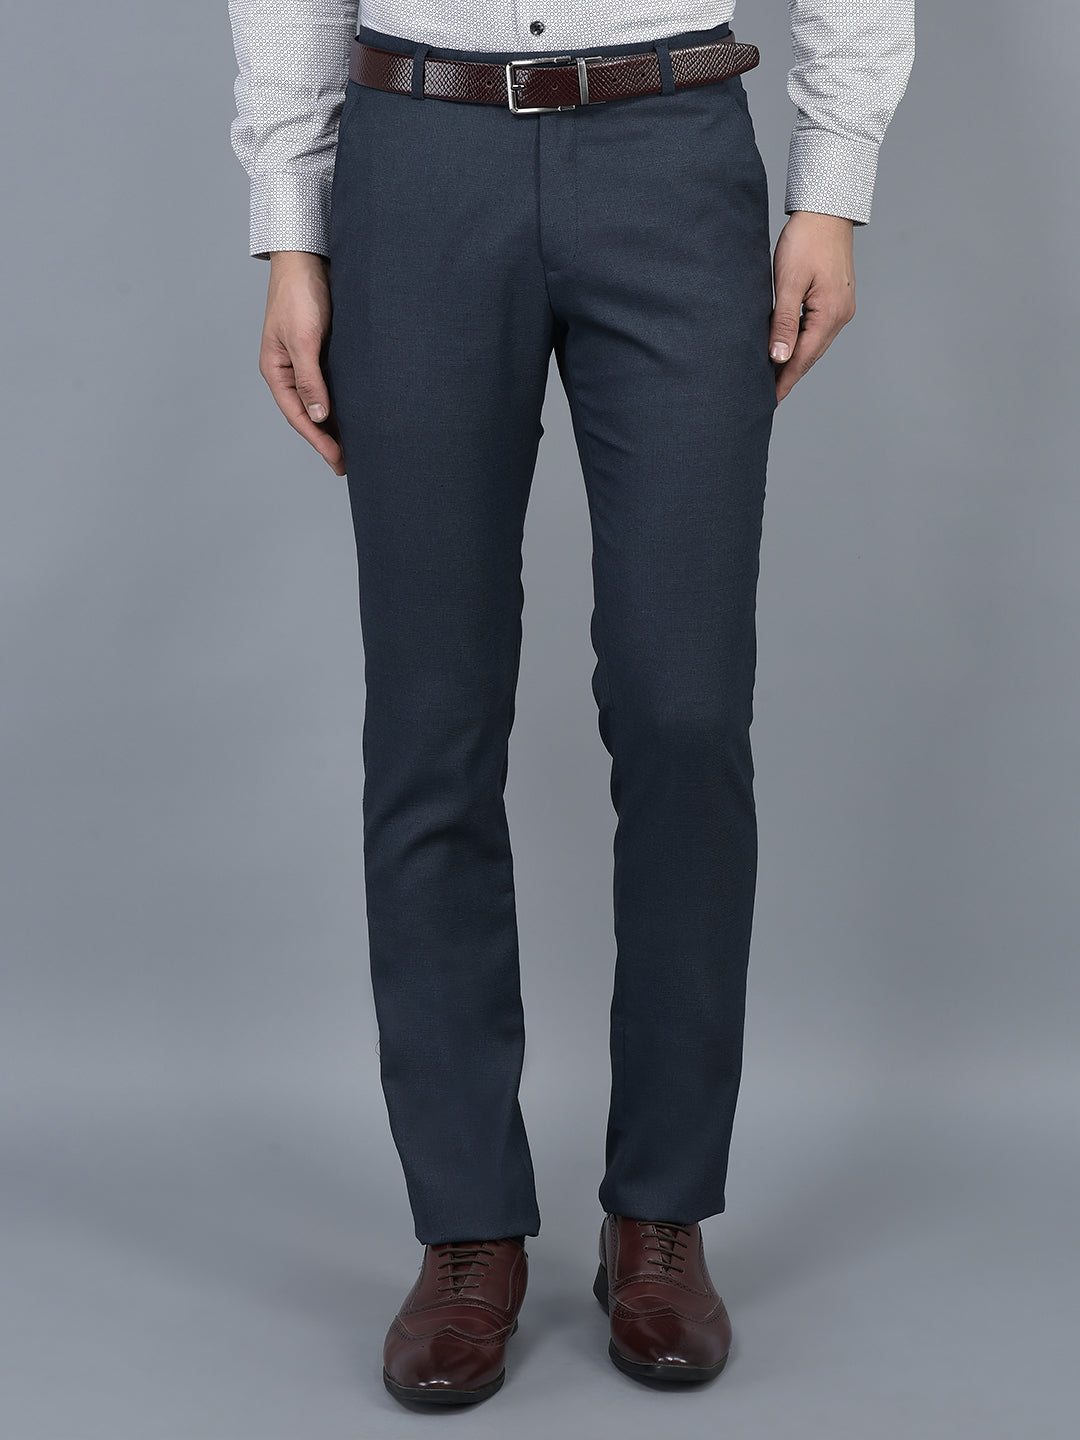 Hudson Classic Navy Formal Trousers